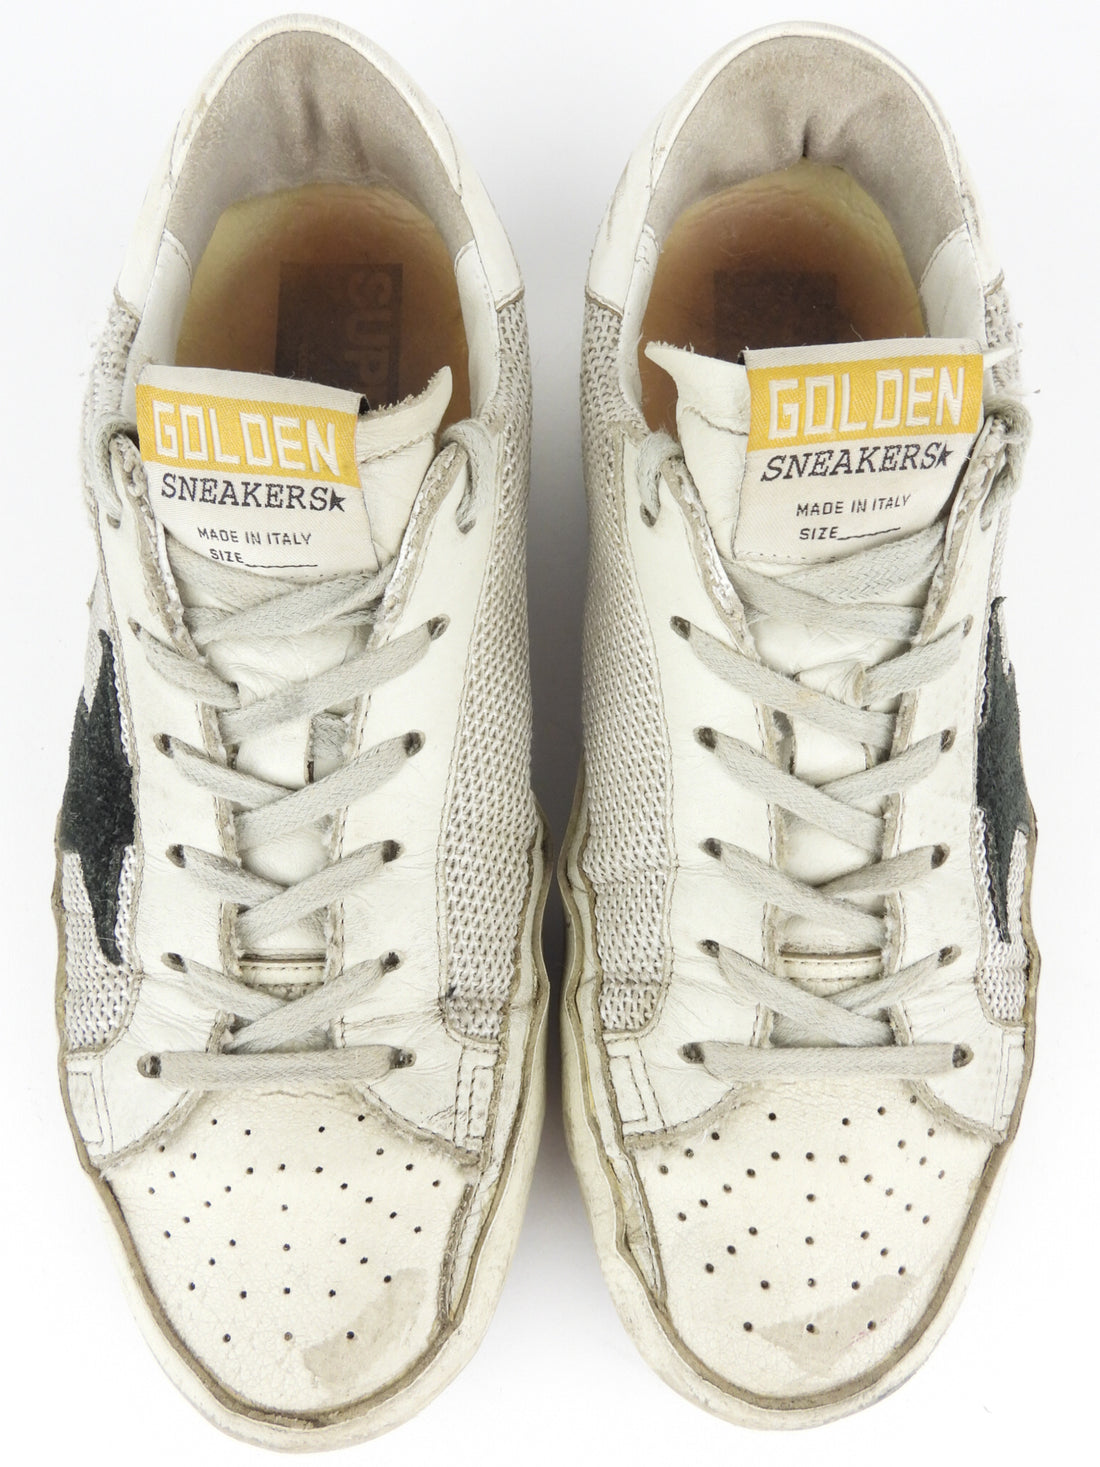 Golden Goose Off-White Leather and Mesh Superstar Low Top Sneakers - 38 EU | 8 US